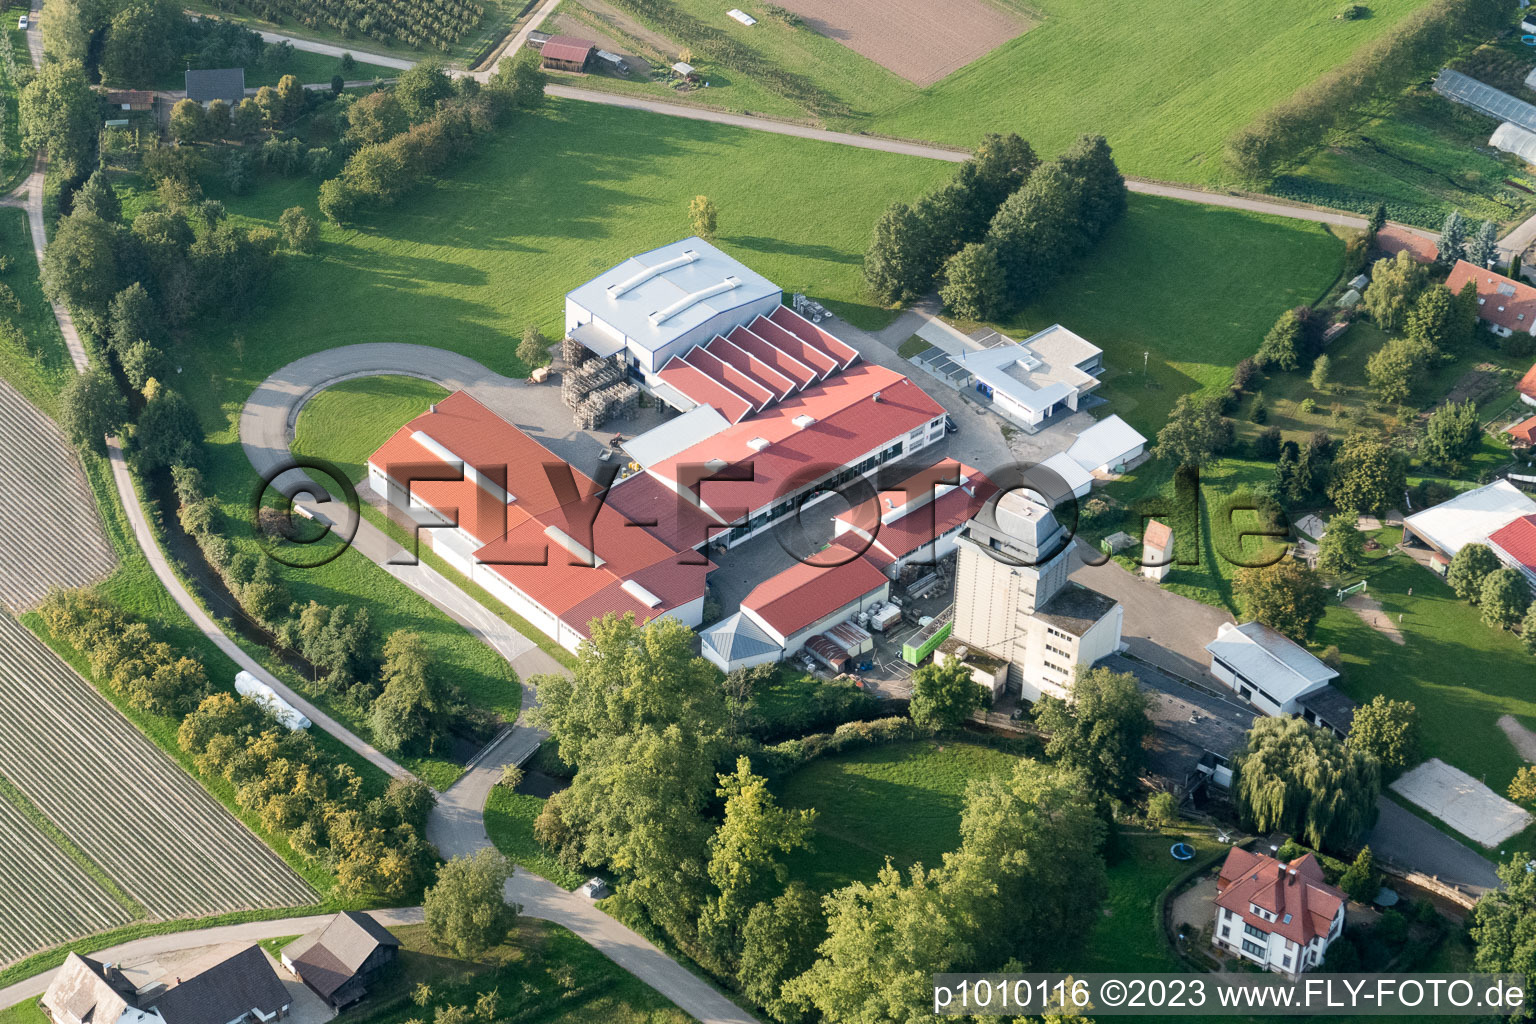 Aerial view of Kraewa GmbH from the southeast in the district Erlach in Renchen in the state Baden-Wuerttemberg, Germany